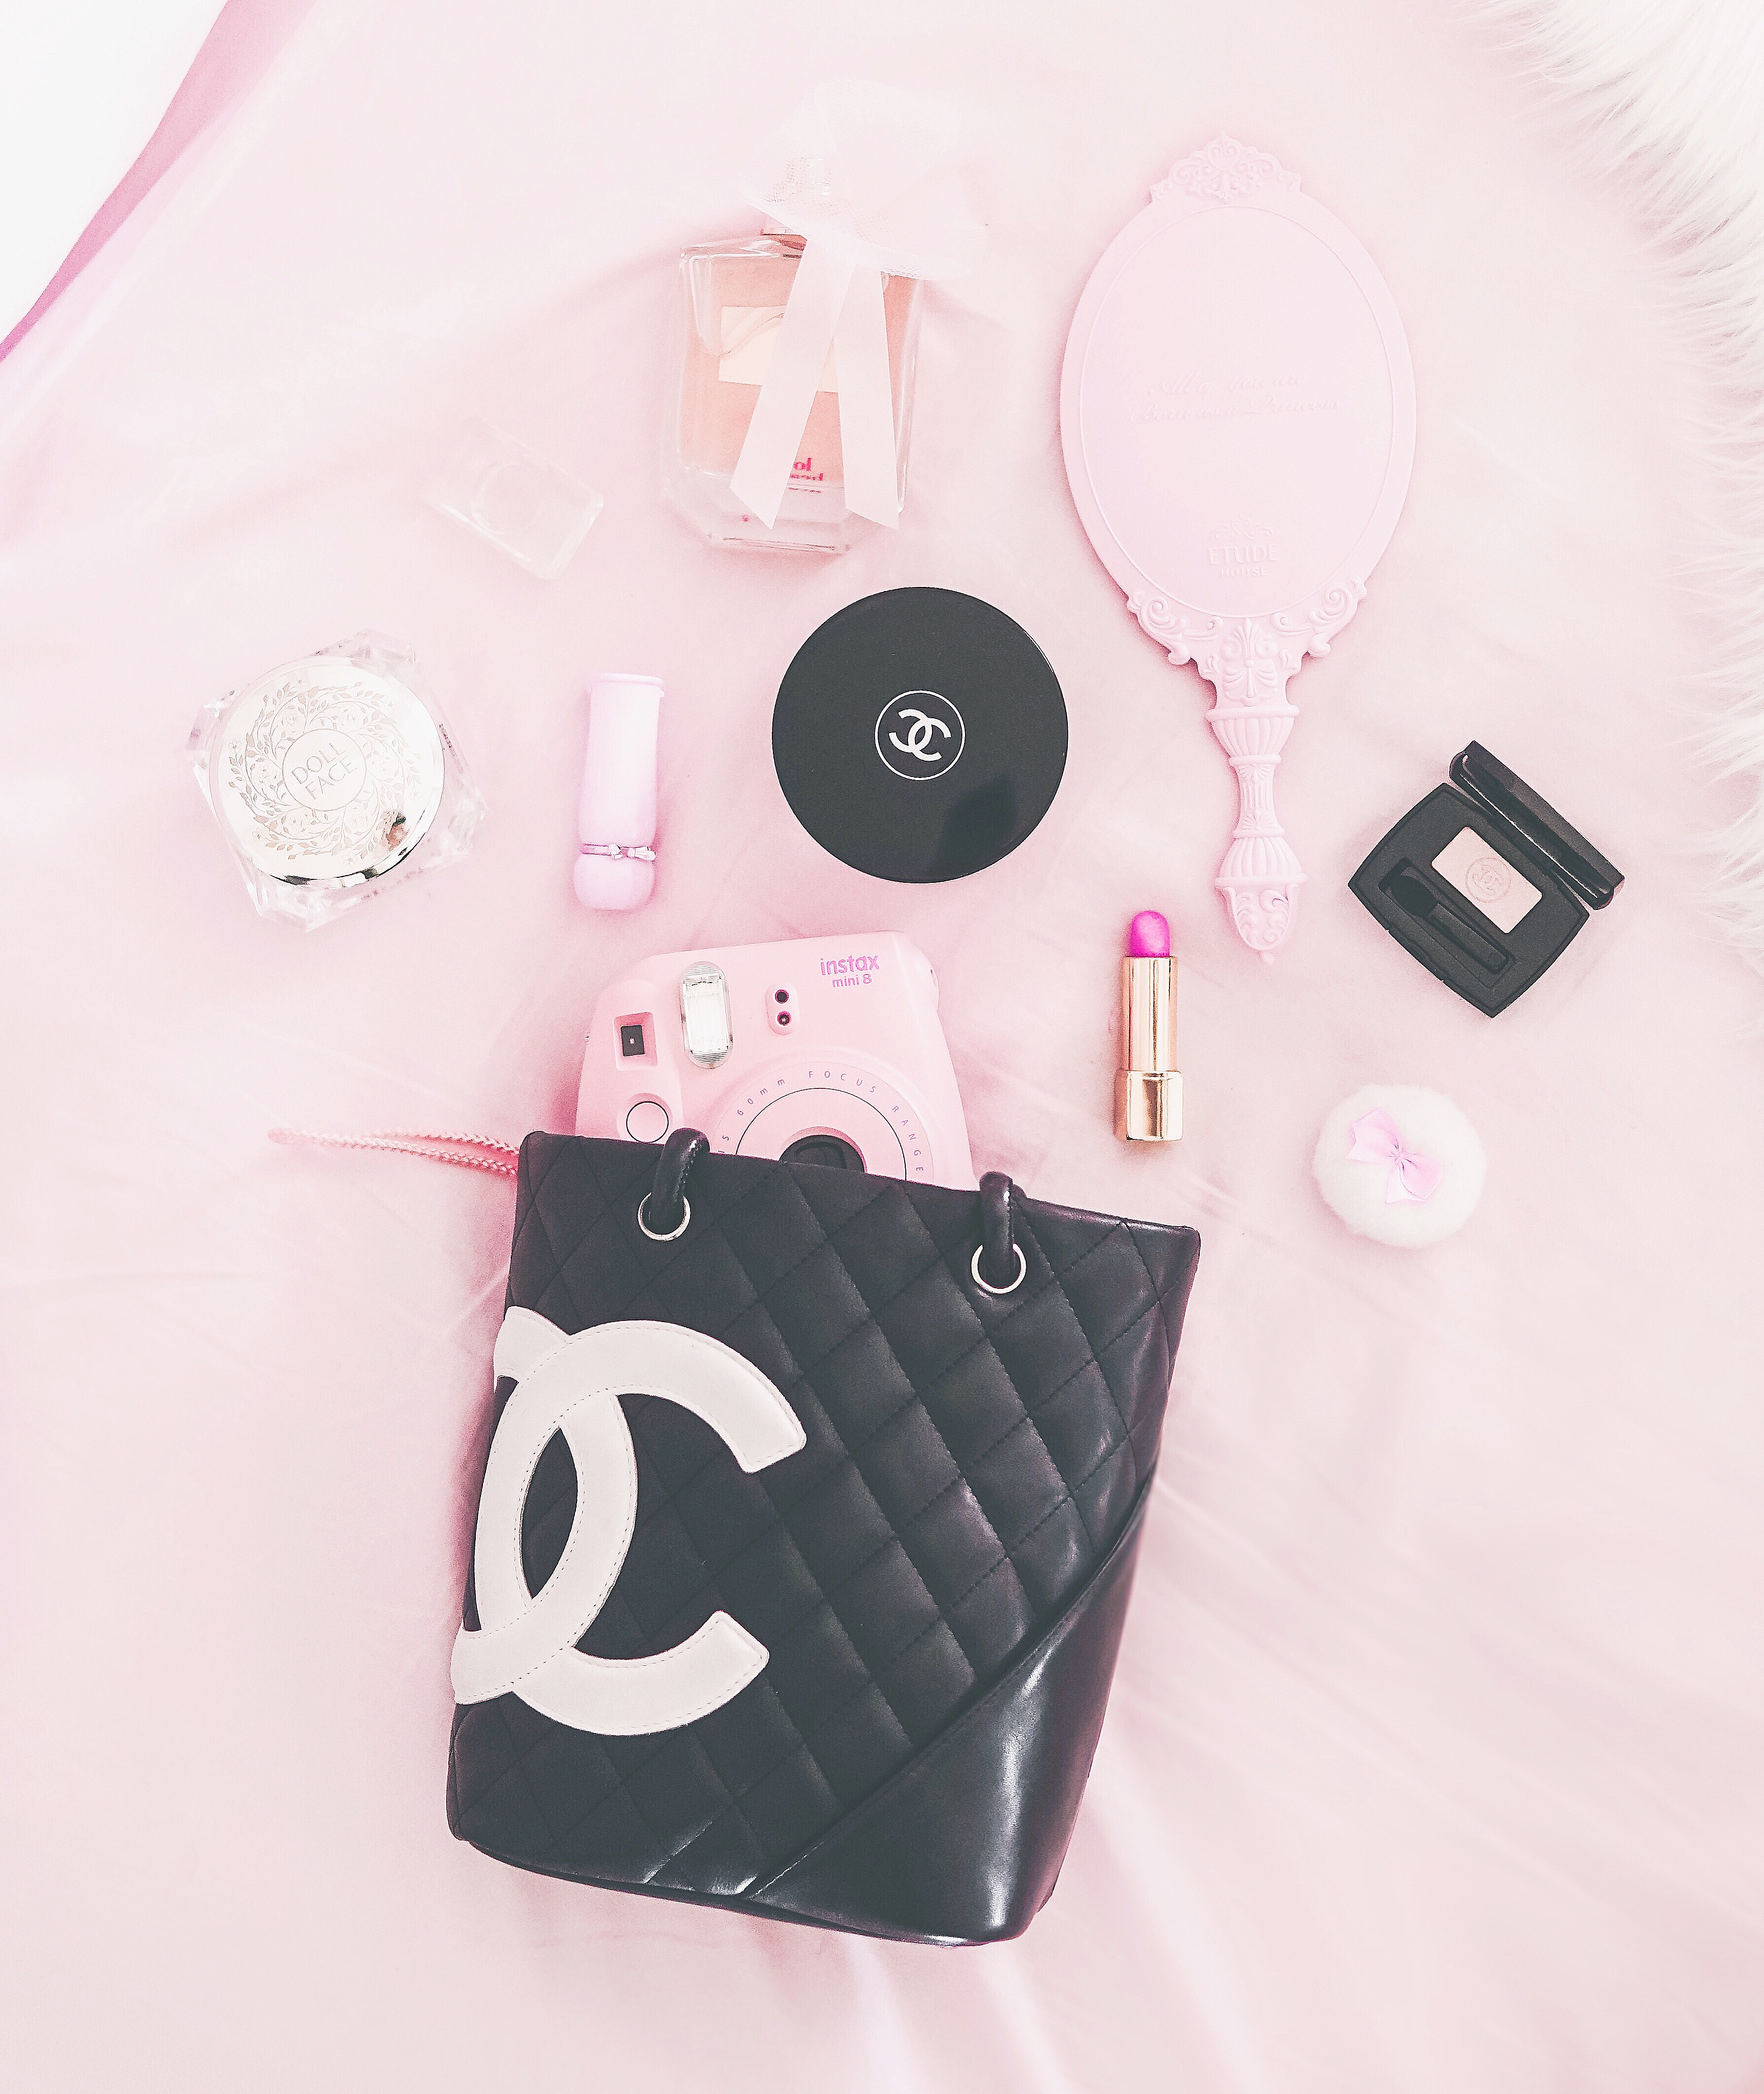 A Beautiful Chanel Bag From Marque Supply